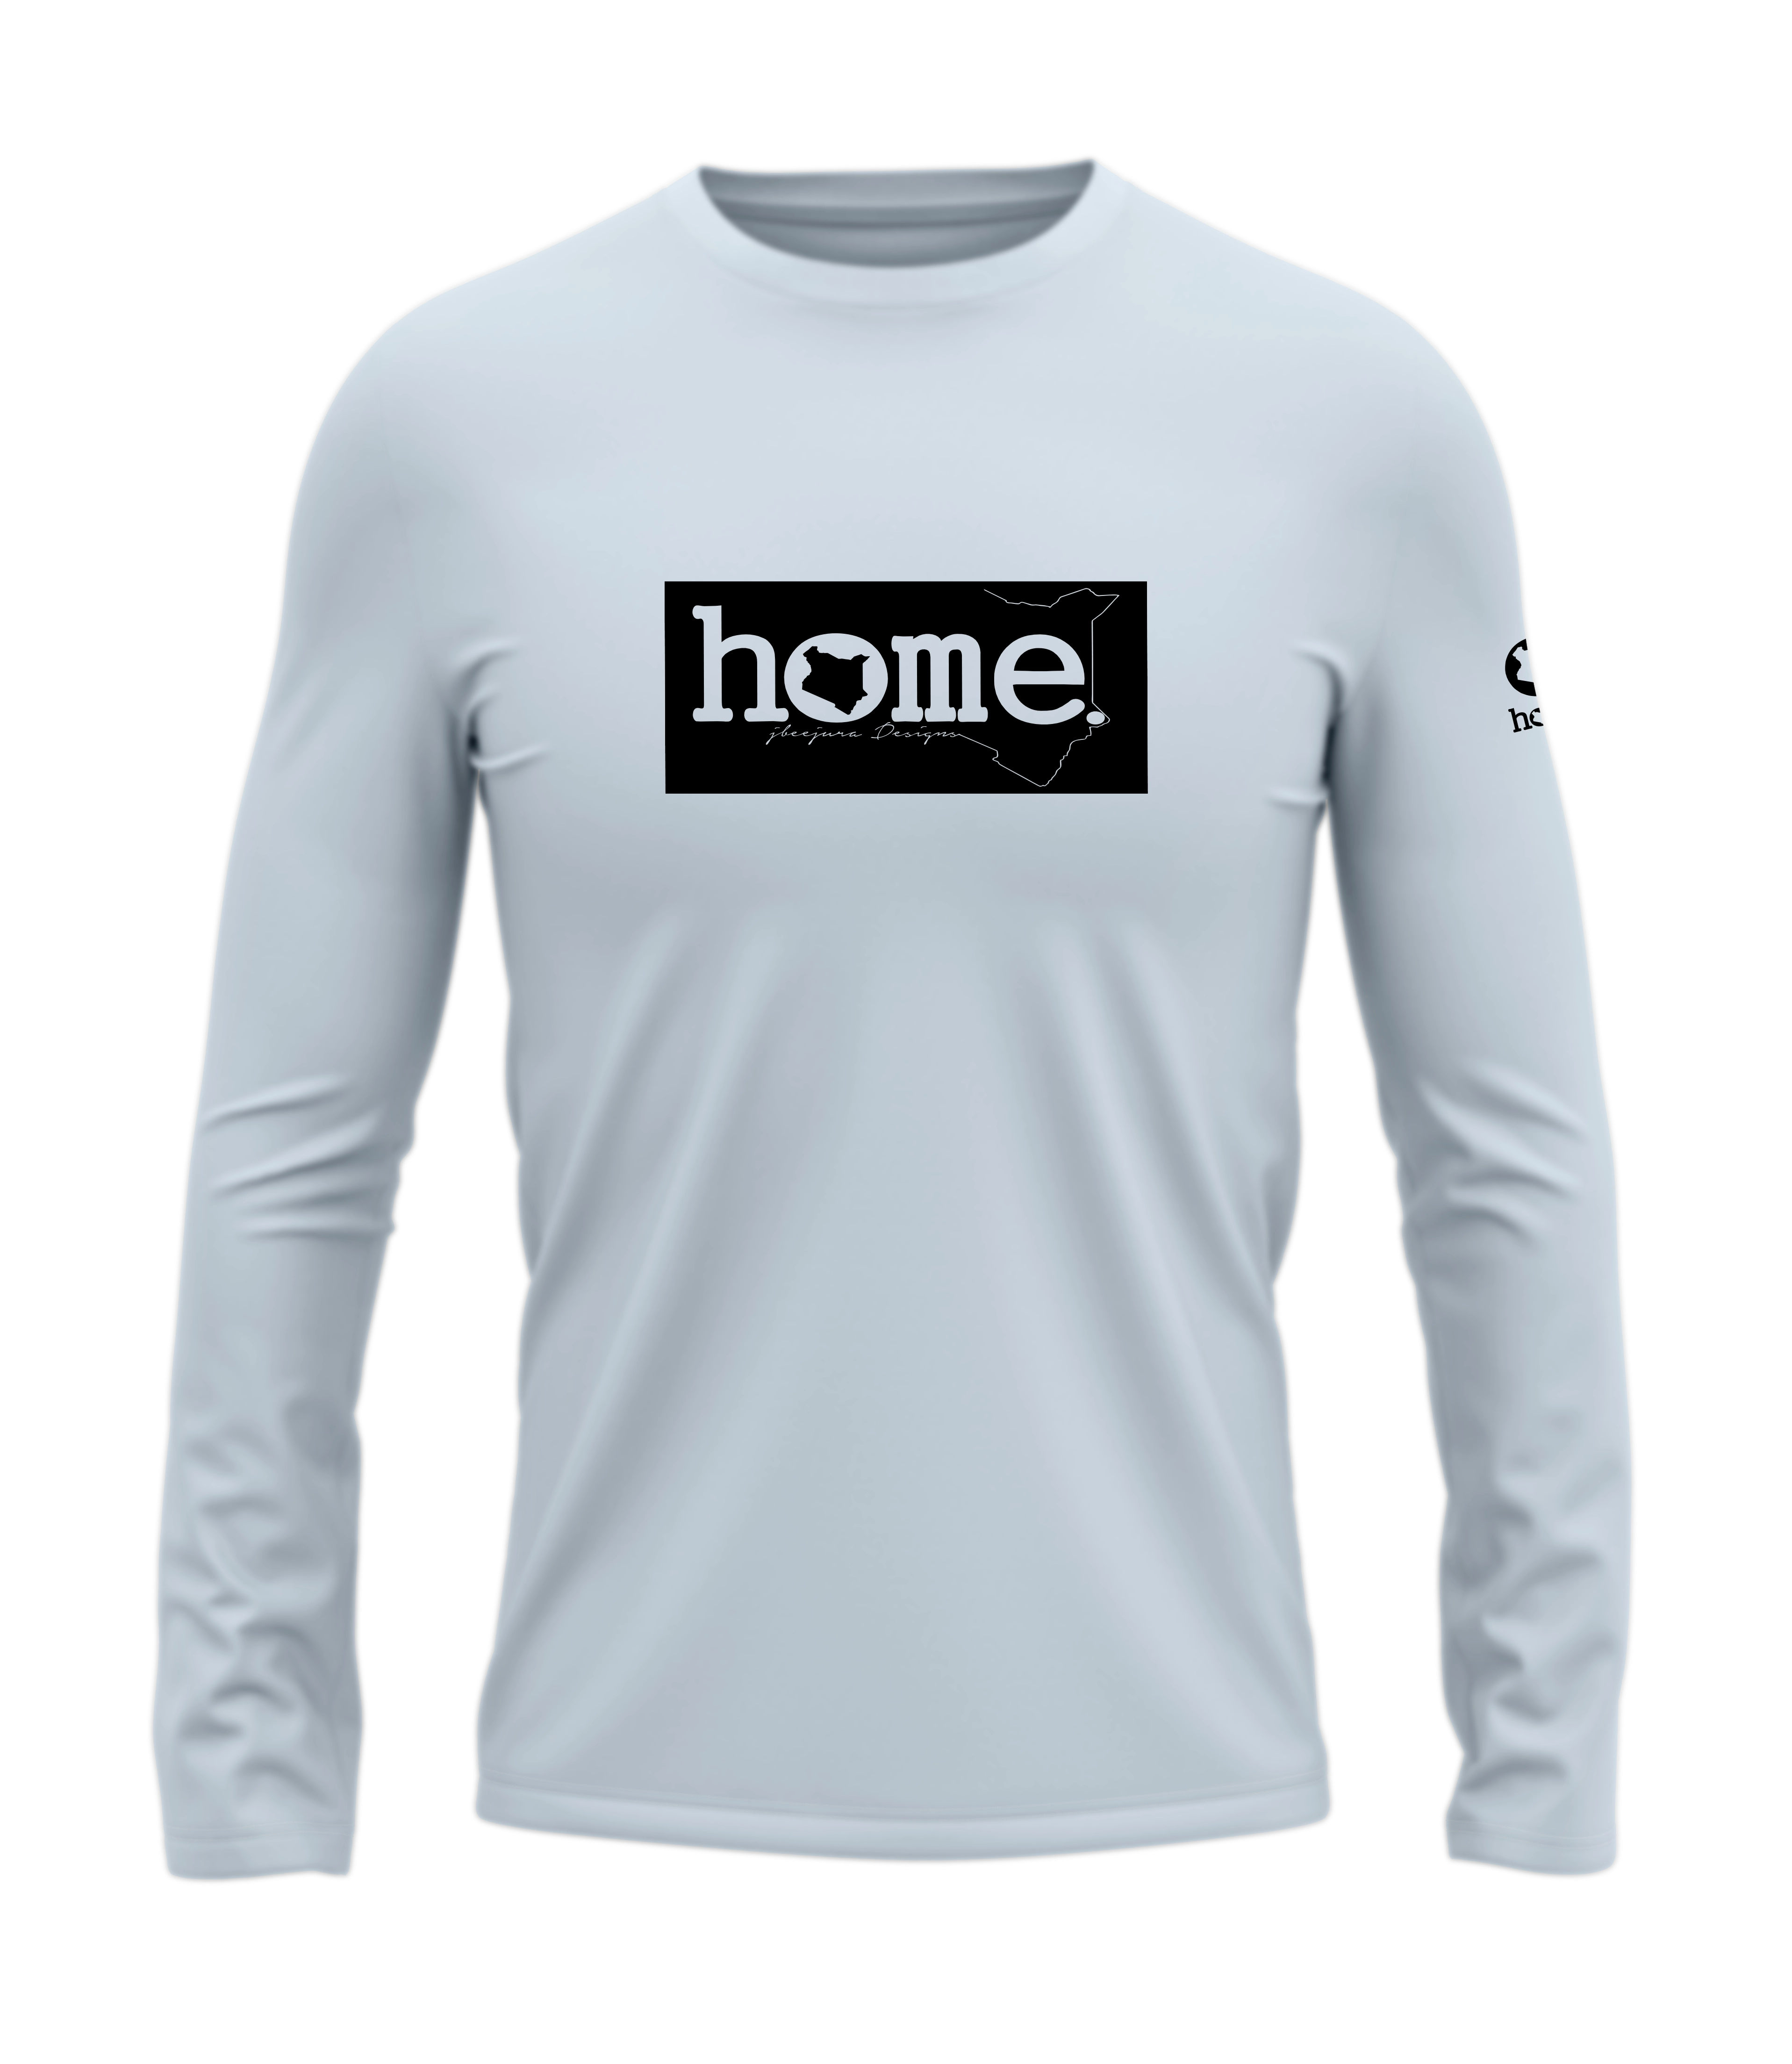 home_254 LONG-SLEEVED SKY-BLUE T-SHIRT WITH A BLACK CLASSIC PRINT – COTTON PLUS FABRIC